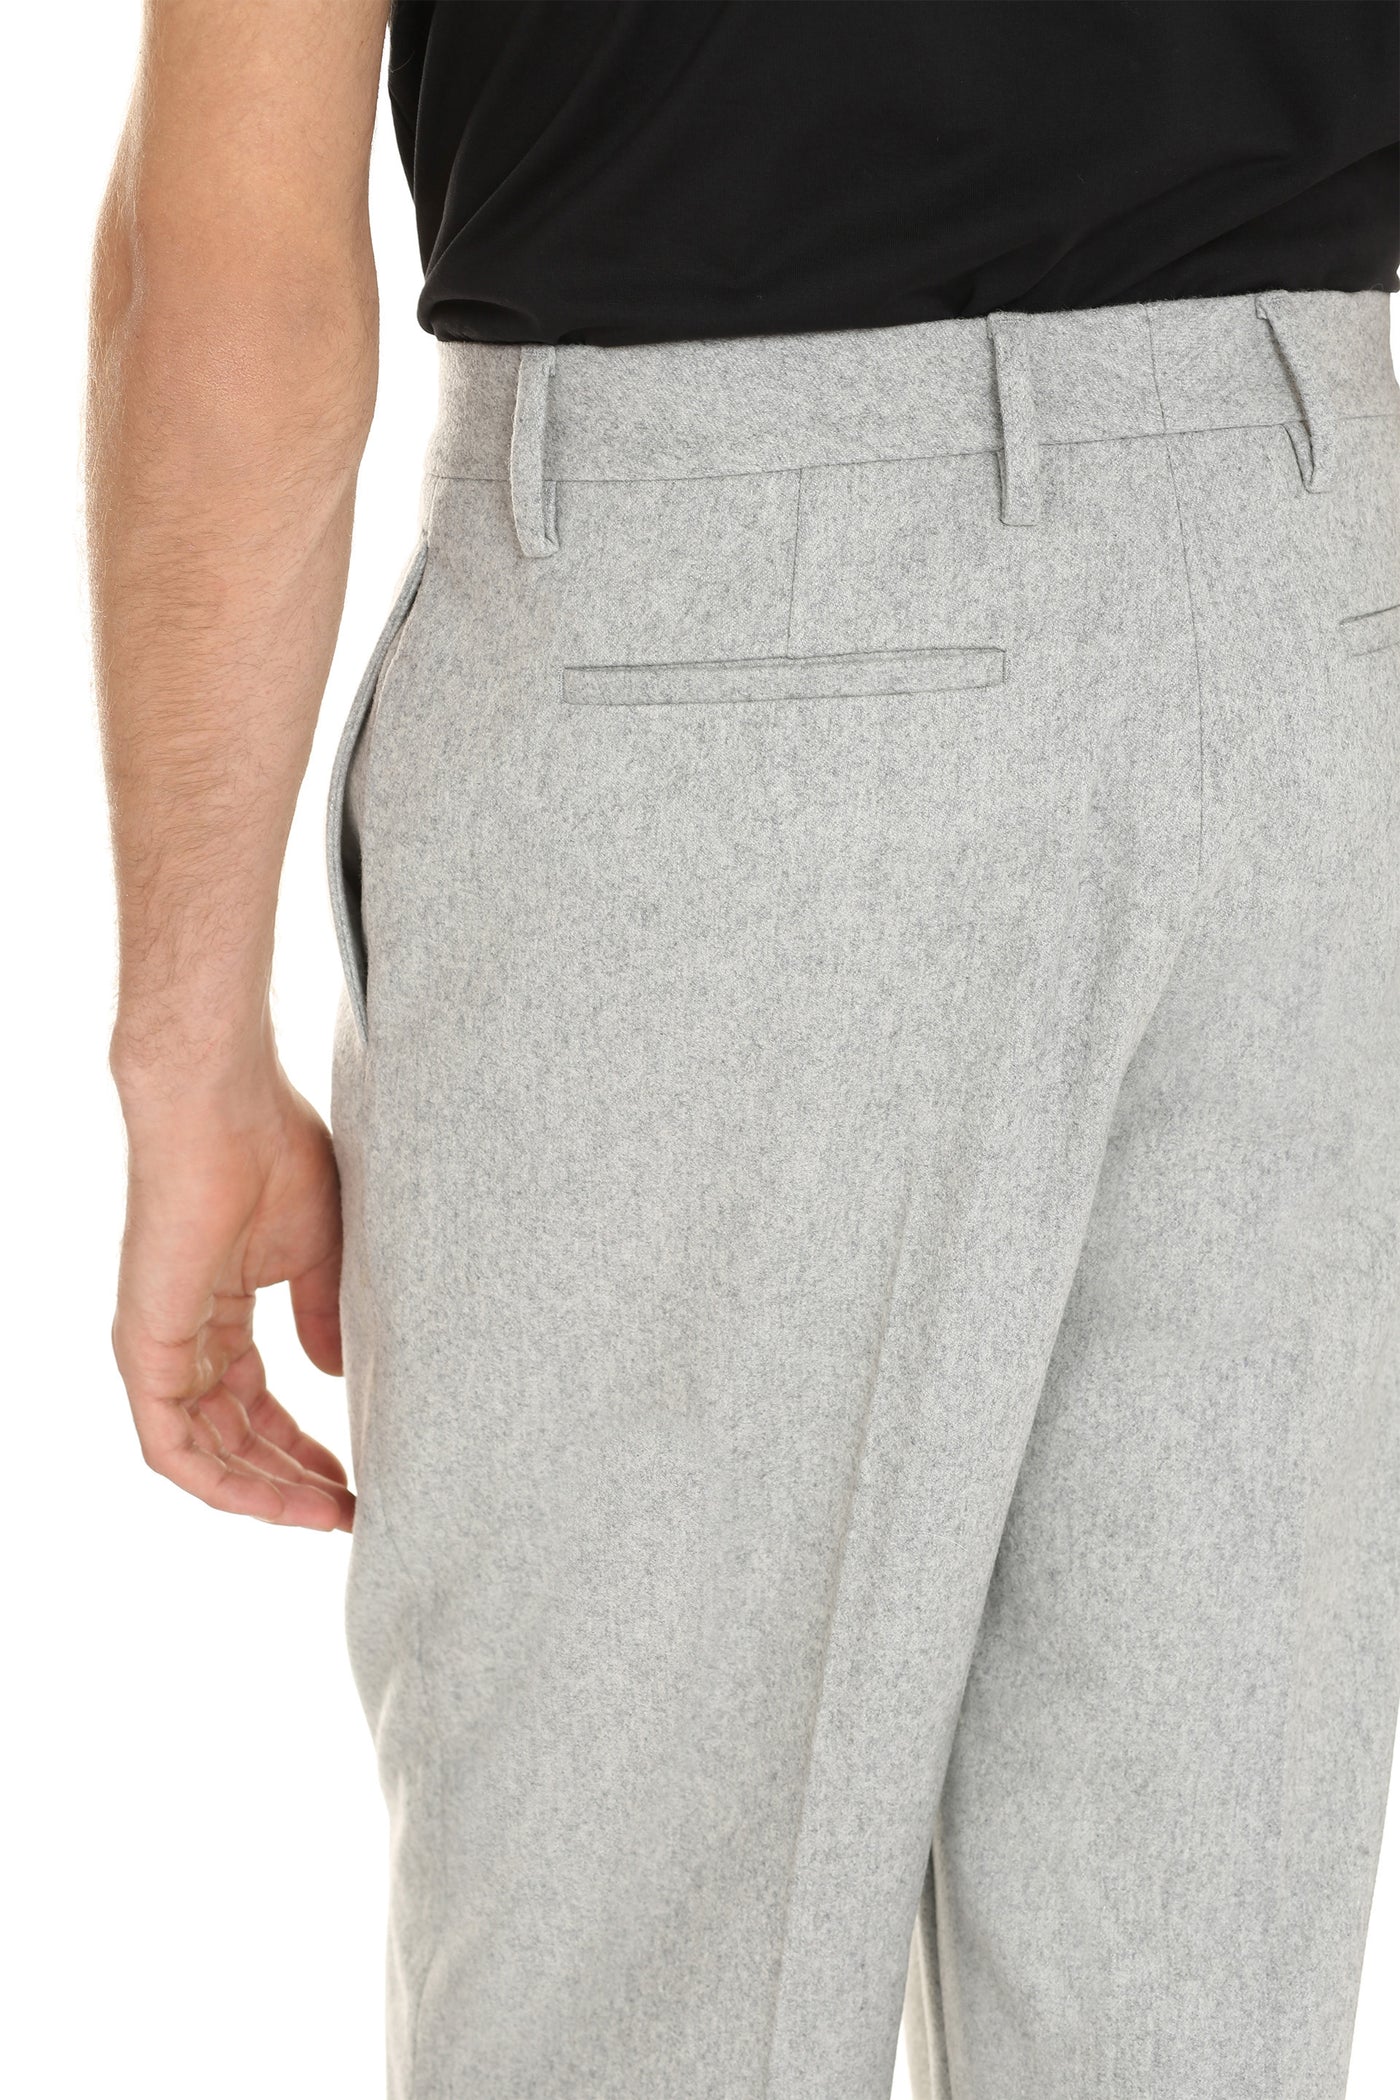 0500 OFF-WHITE WOOL BLEND TROUSERS